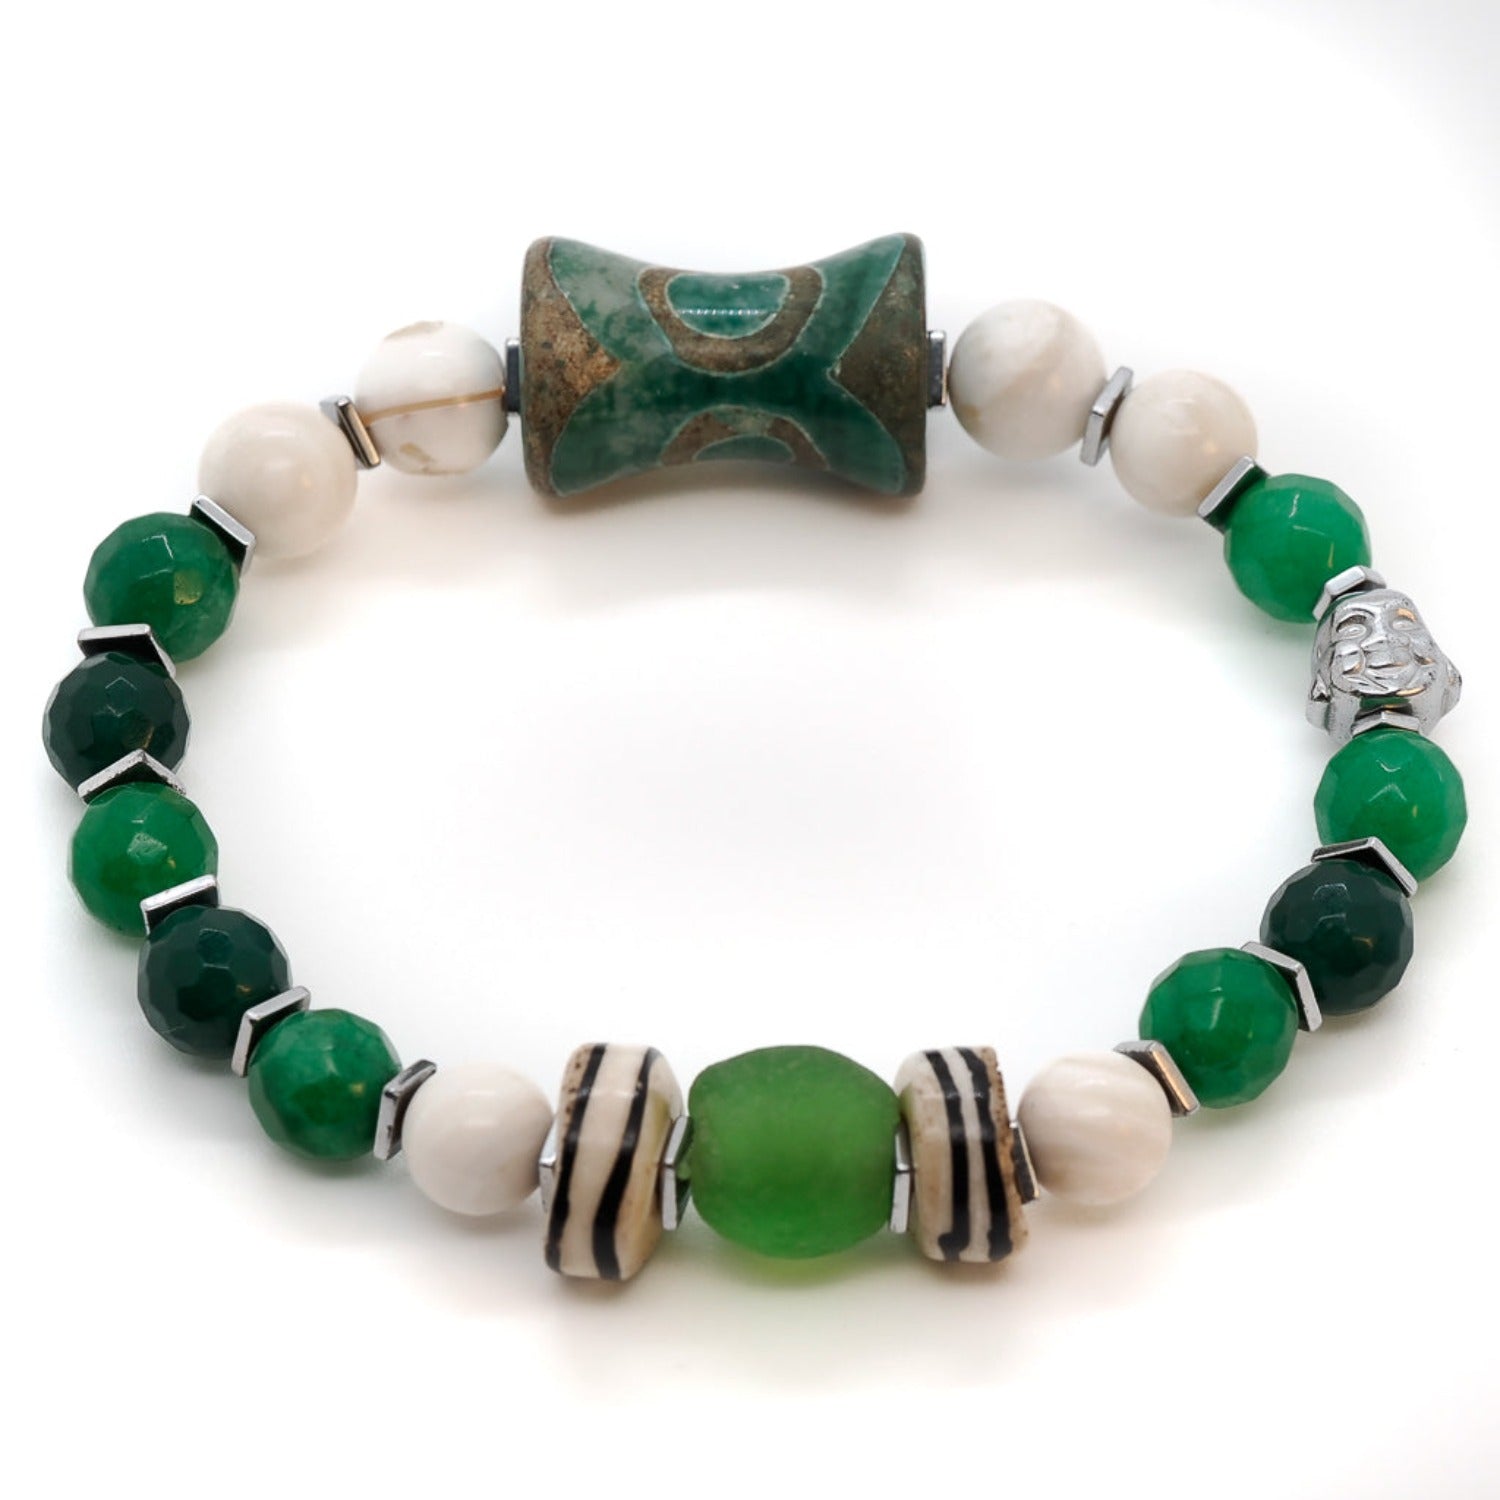 The Green Buddha Bracelet beautifully crafted with a silver color Hematite stone Buddha bead, Handmade Nepal Green bead, and African green glass bead, representing mindfulness and spiritual well-being.